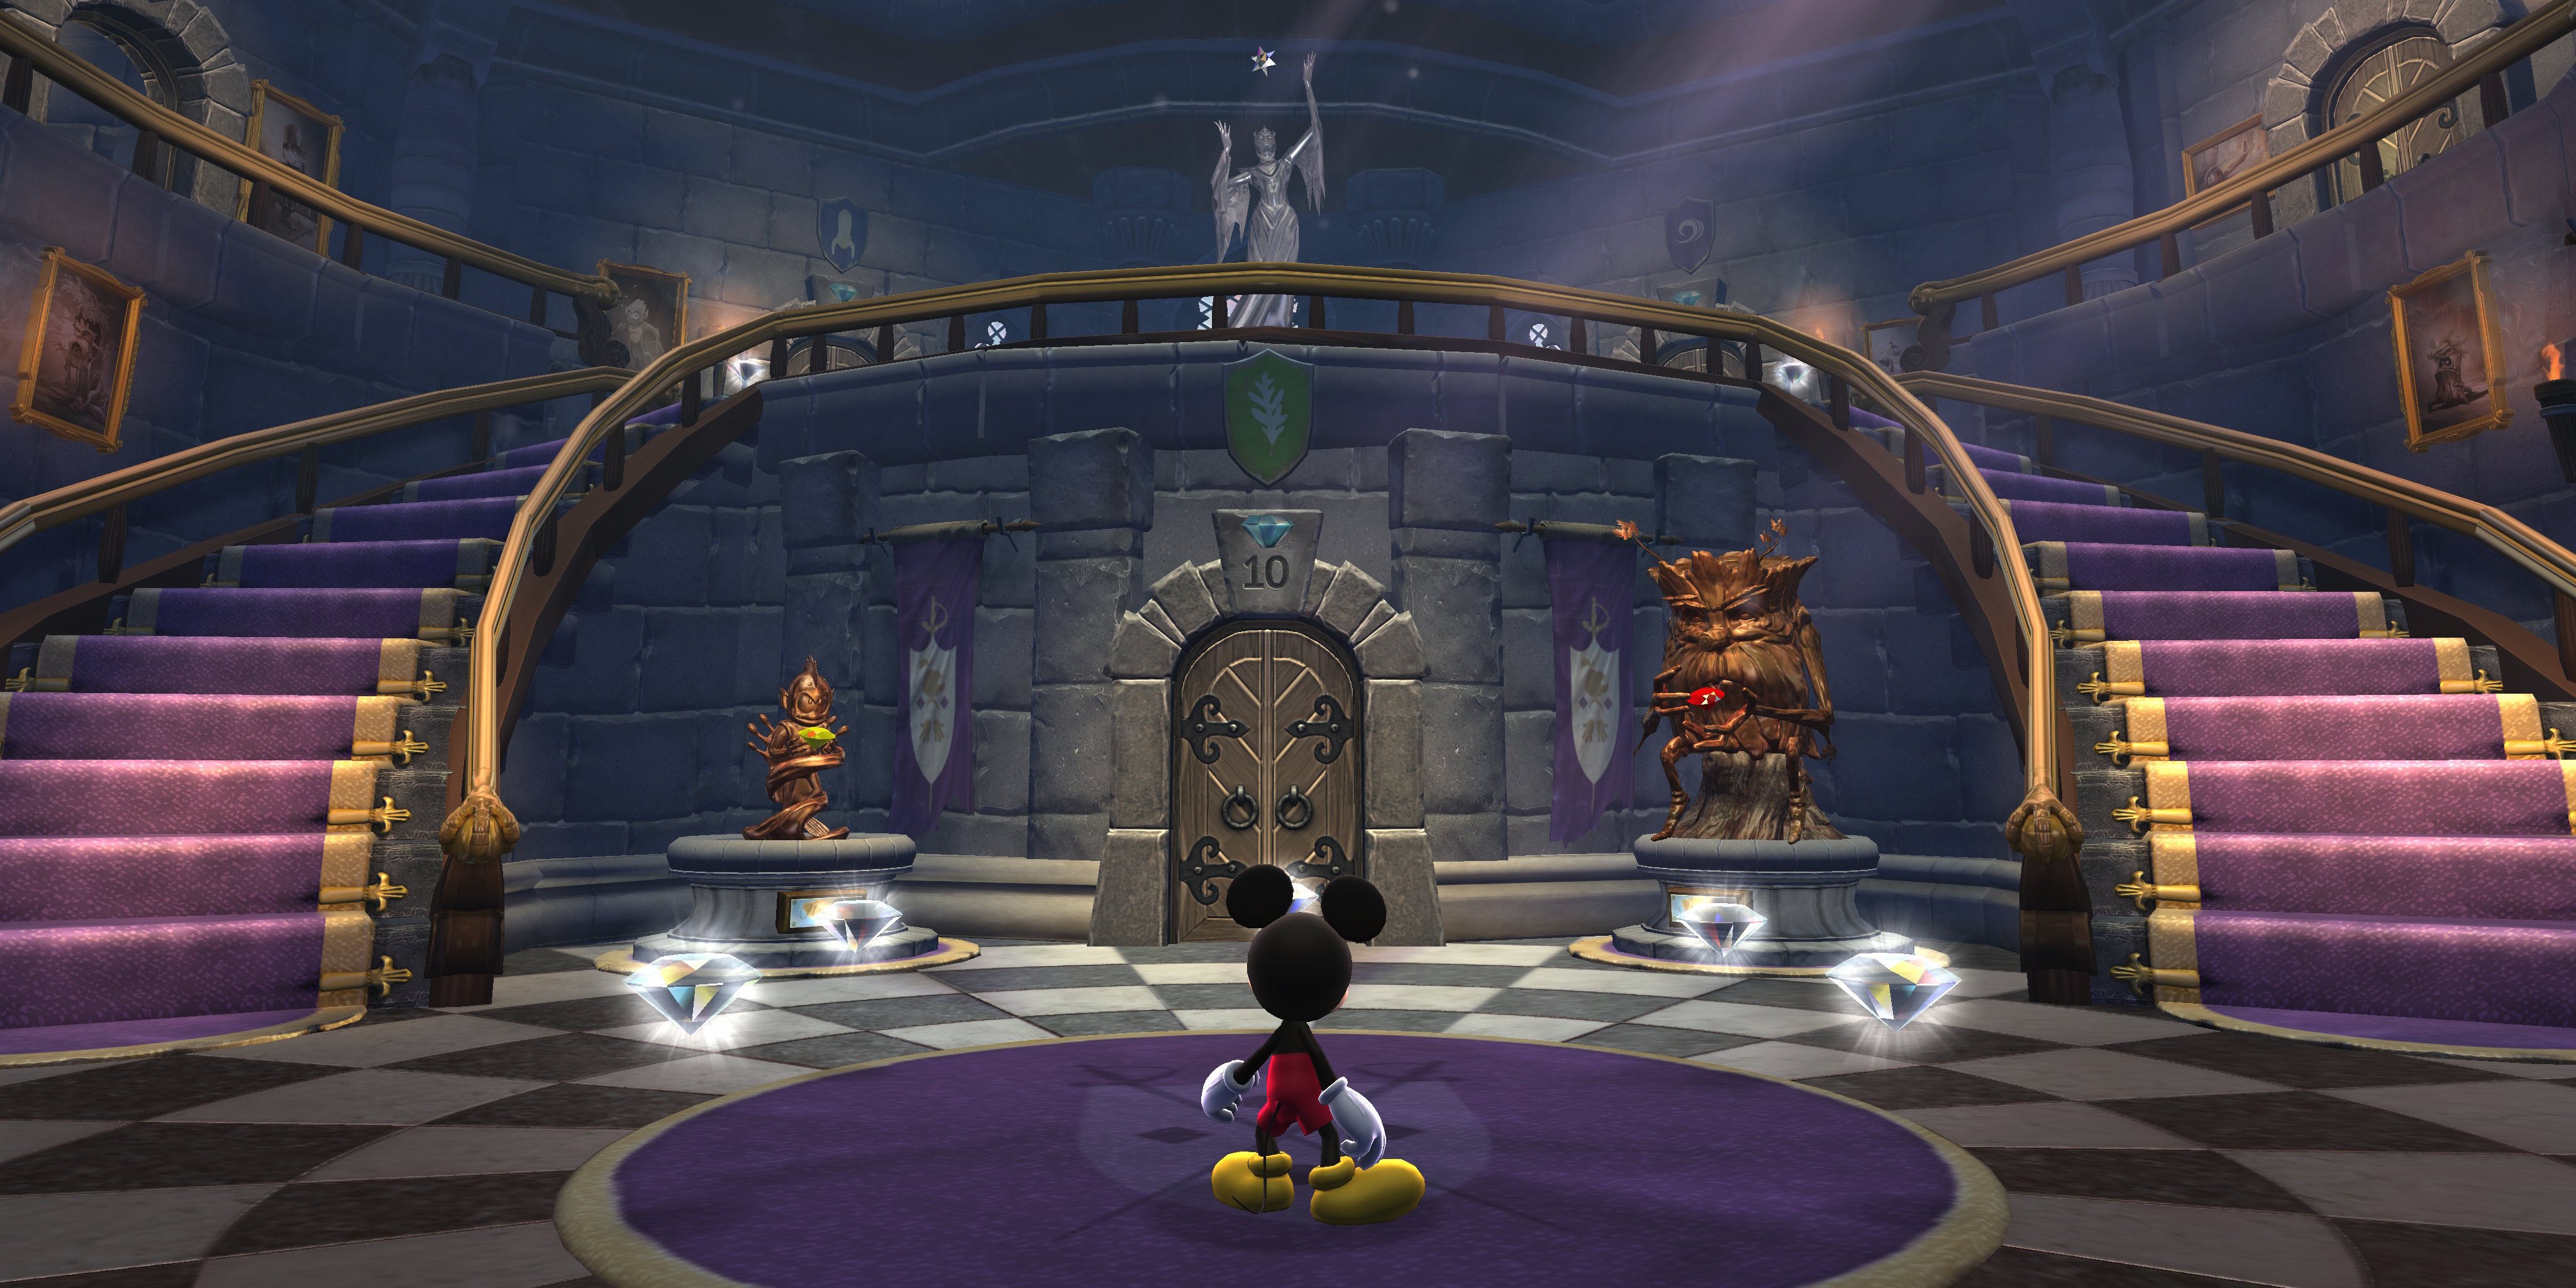 castle of illusion starring mickey mouse